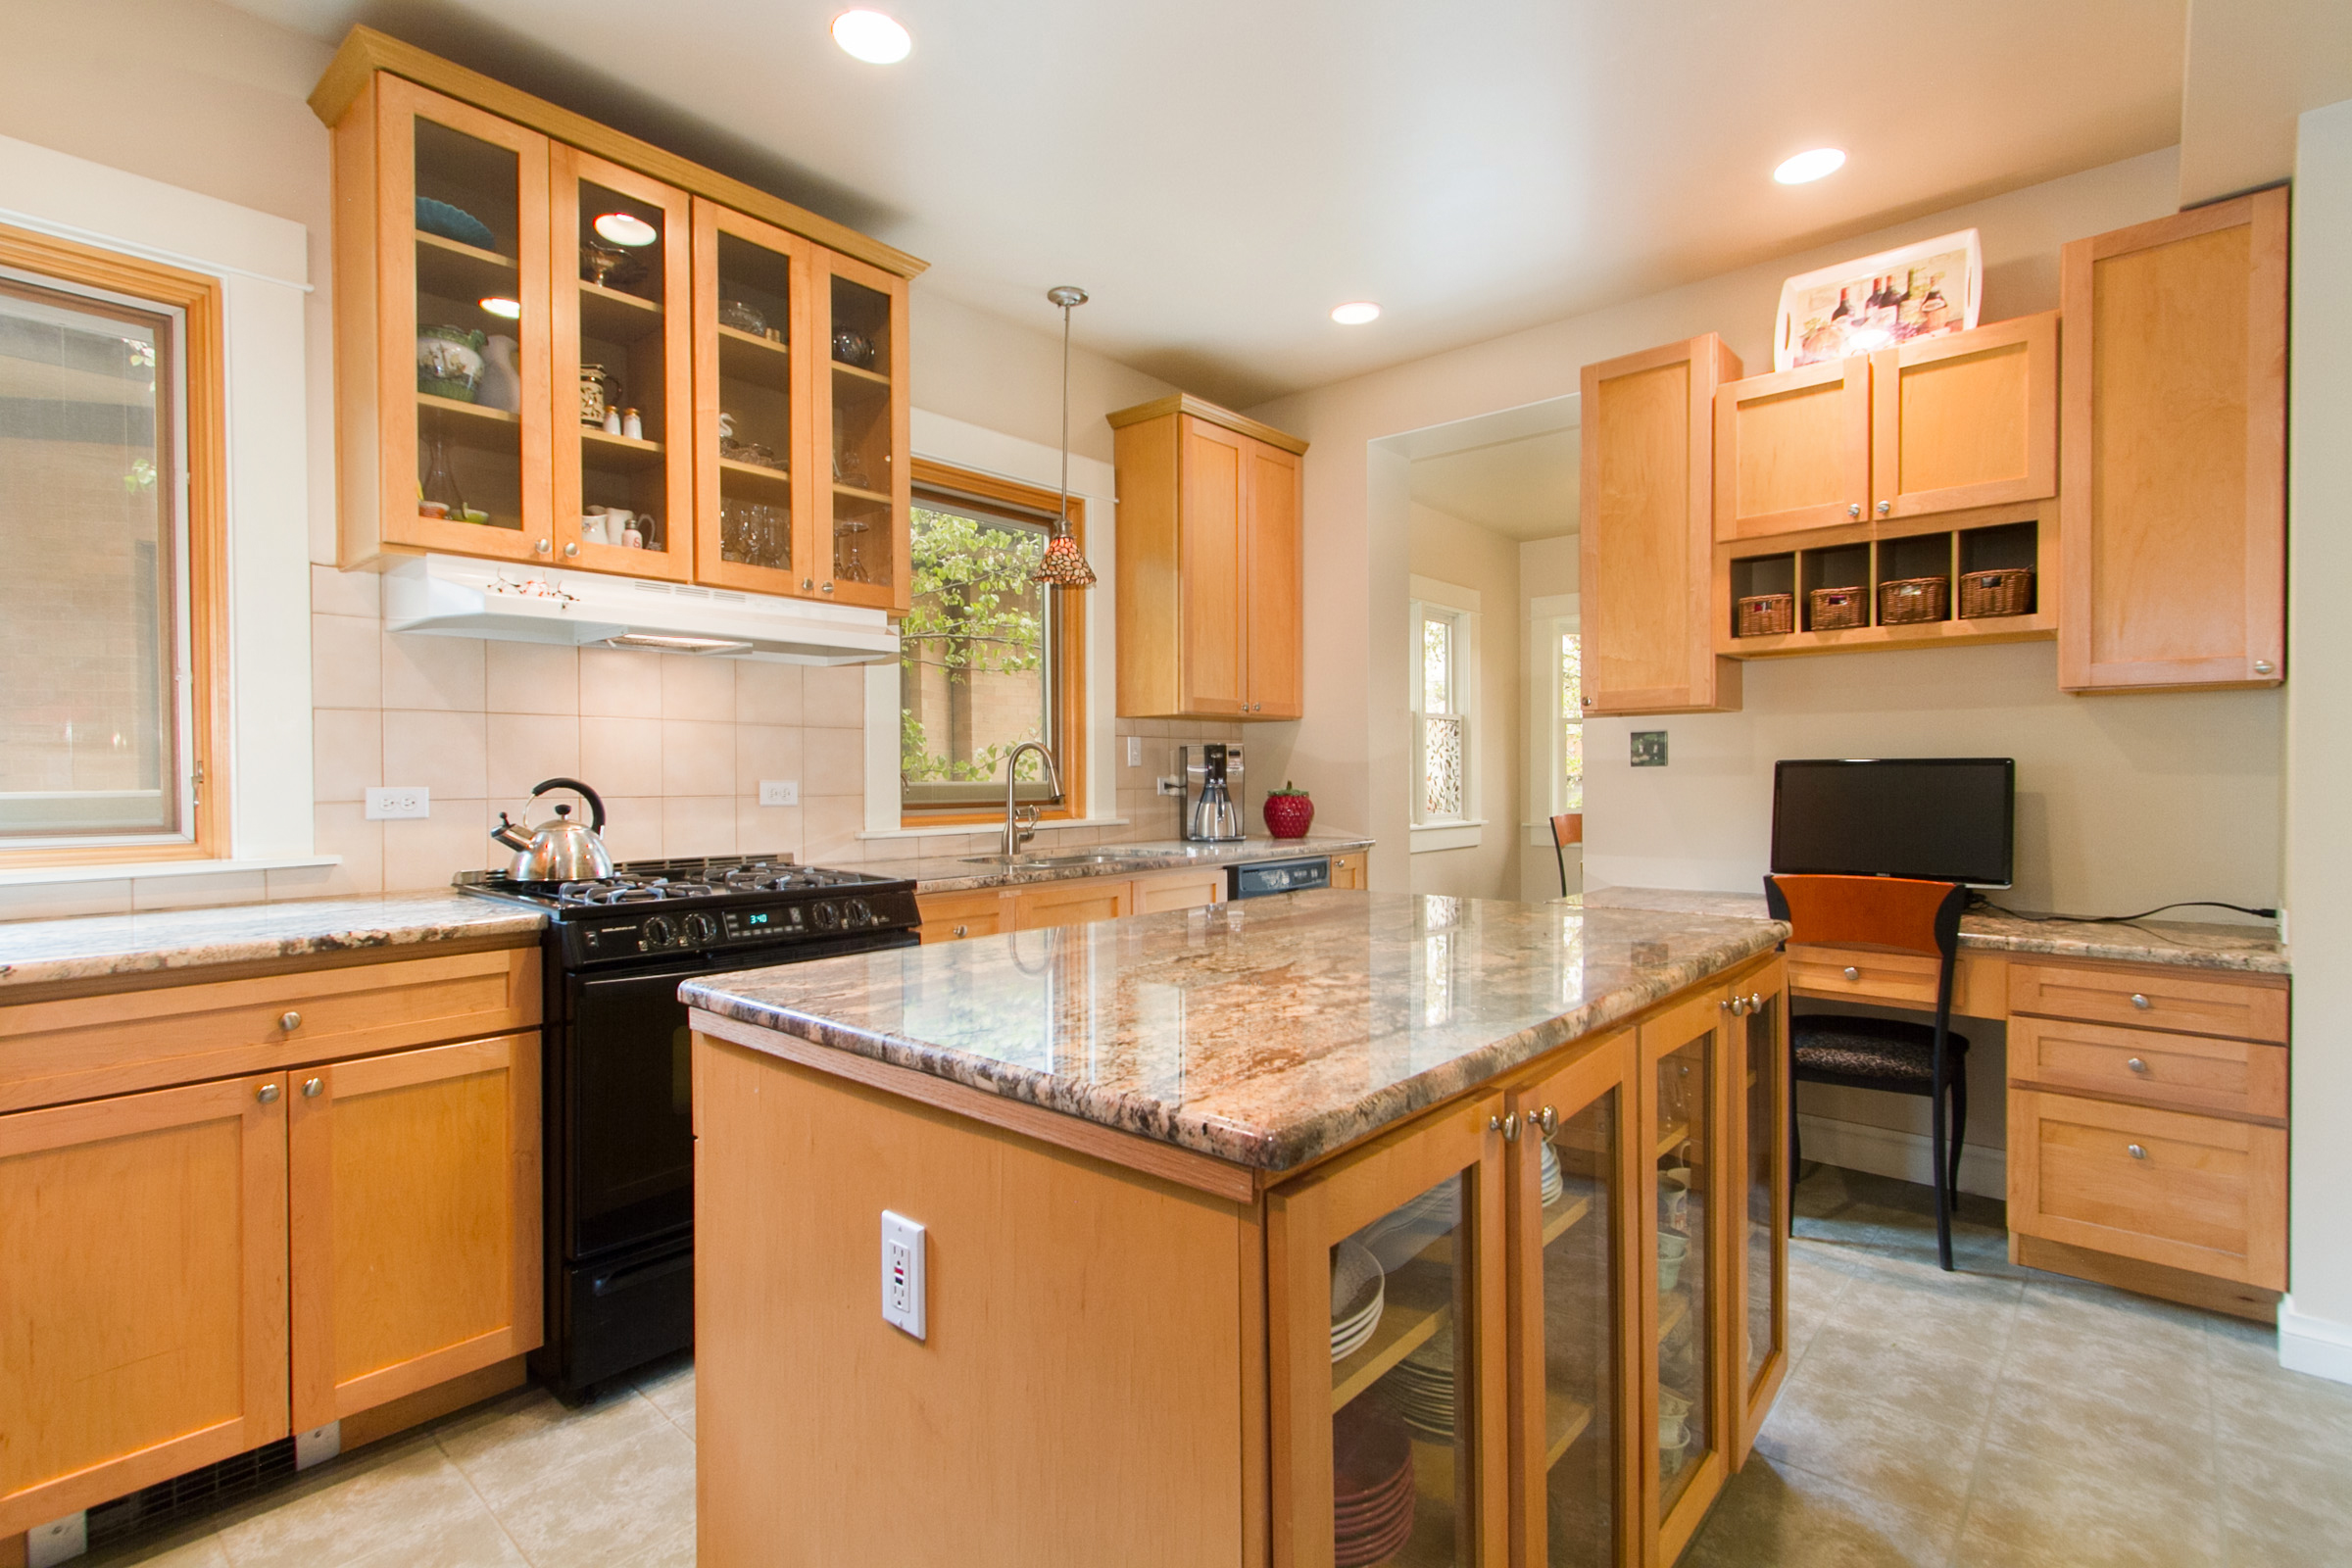 1246123_Updated-Kitchen-with-Granite-Counters-And-Desk_high.jpg